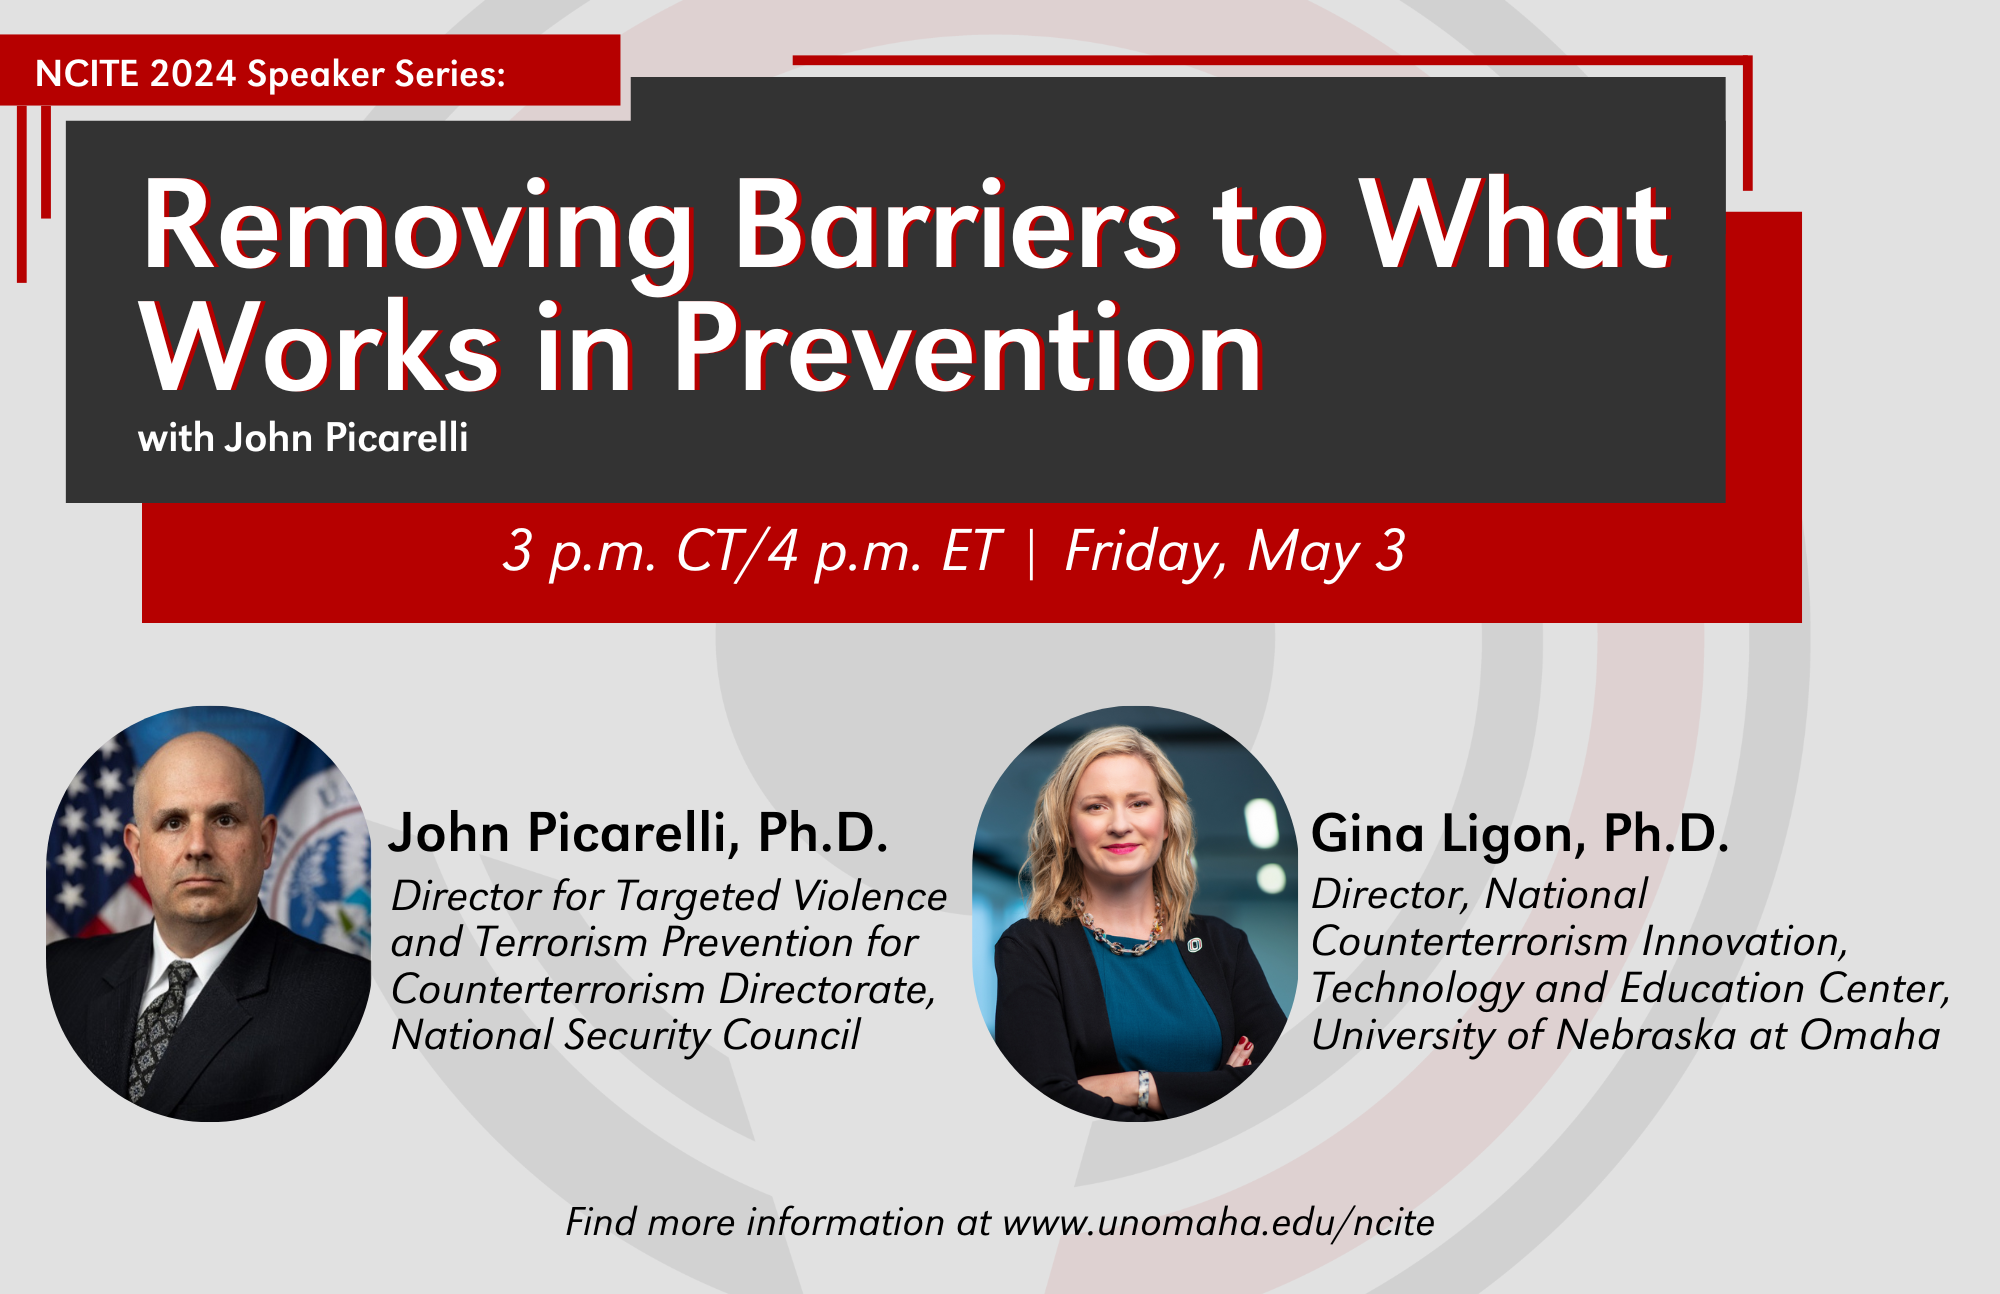 A flyer advertising NCITE's webinar with John Picarelli. It includes a headshot of Picarelli and one of Gina Ligon. The title reads: Removing Barriers to What Works in Prevention.